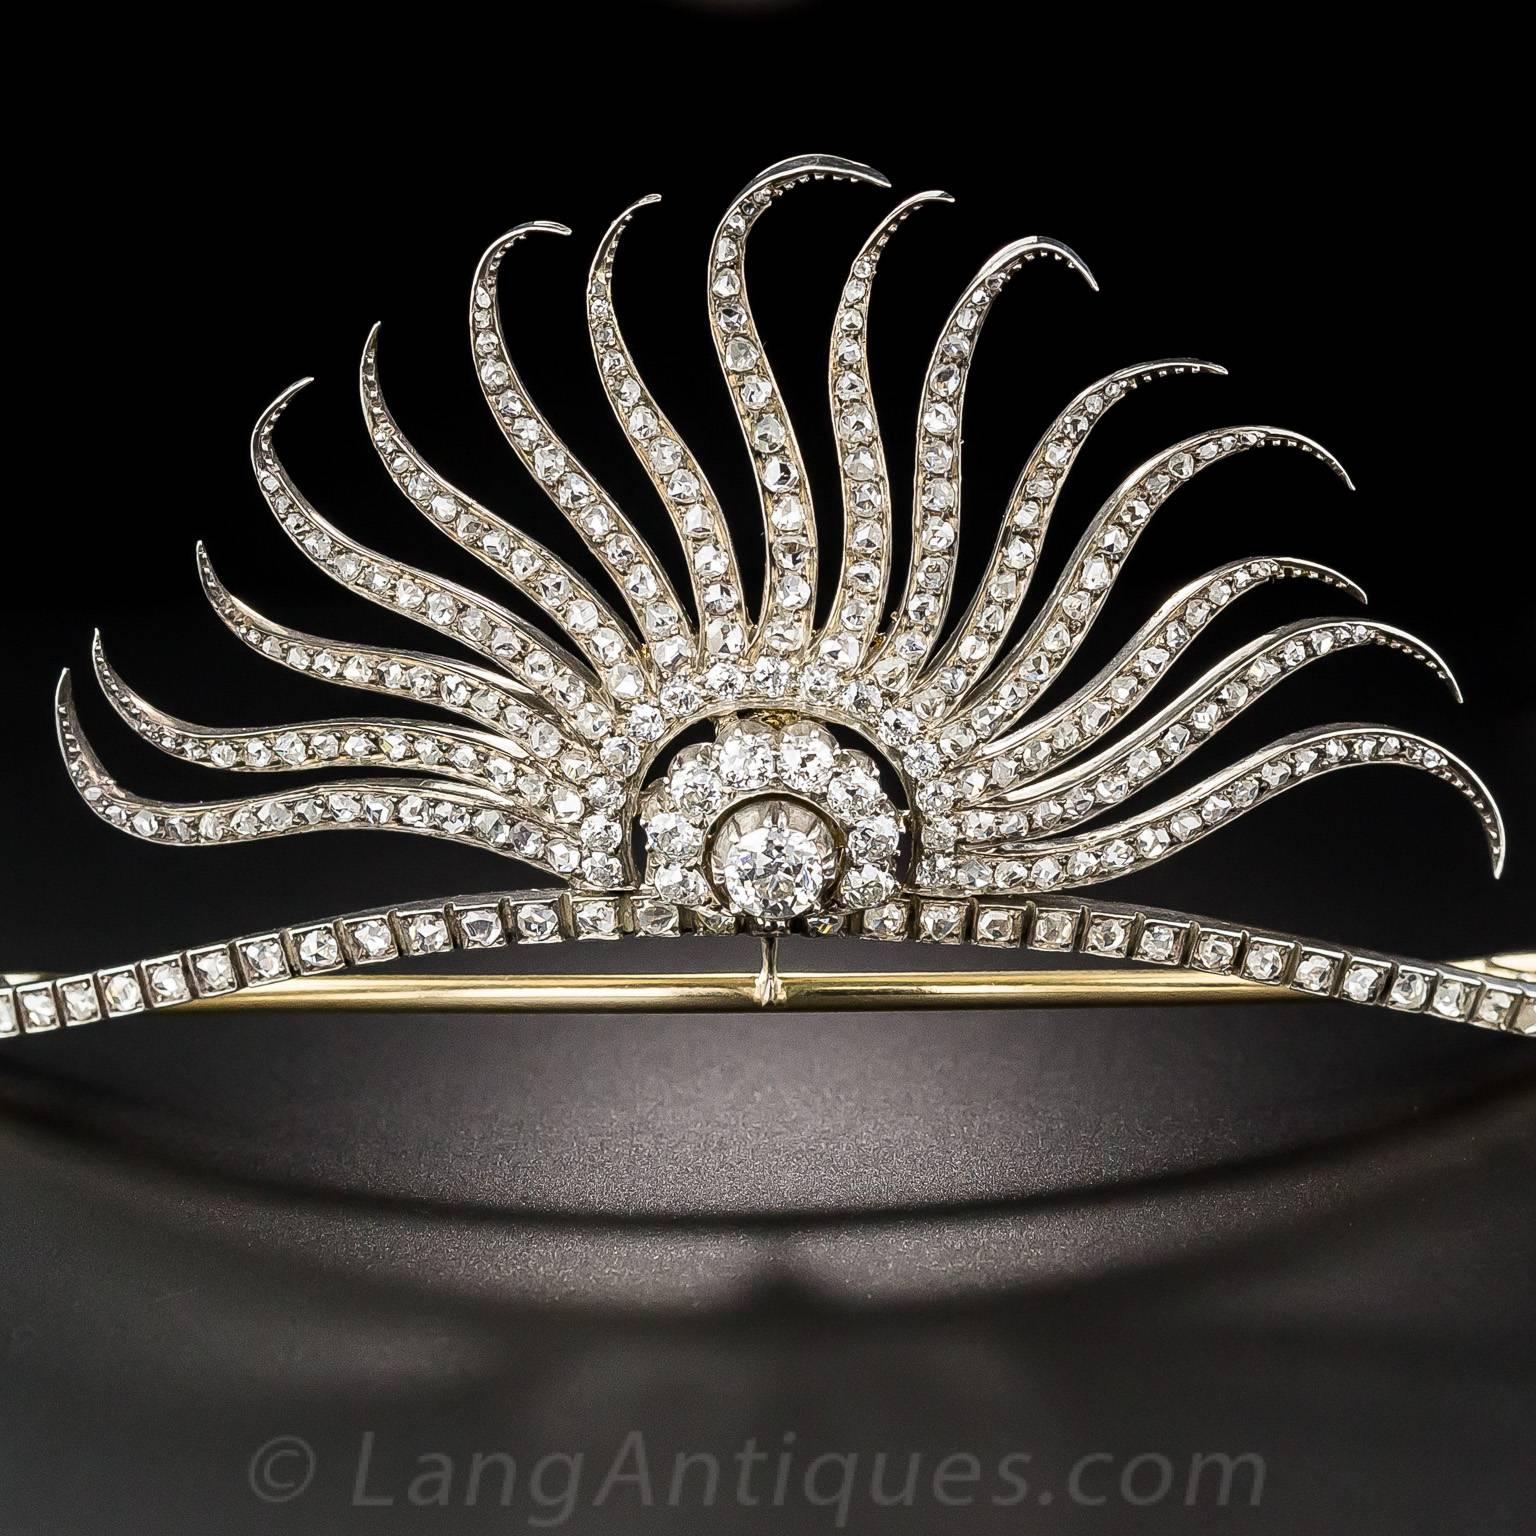 Exotic, singular and stunning. This exquisite and extraordinary tiara, superbly designed and hand-crafted in silver over gold at the turn-of-the-20th-century, gleams with an artfully stylized sunrise composed of more than 250 rose-cut diamonds